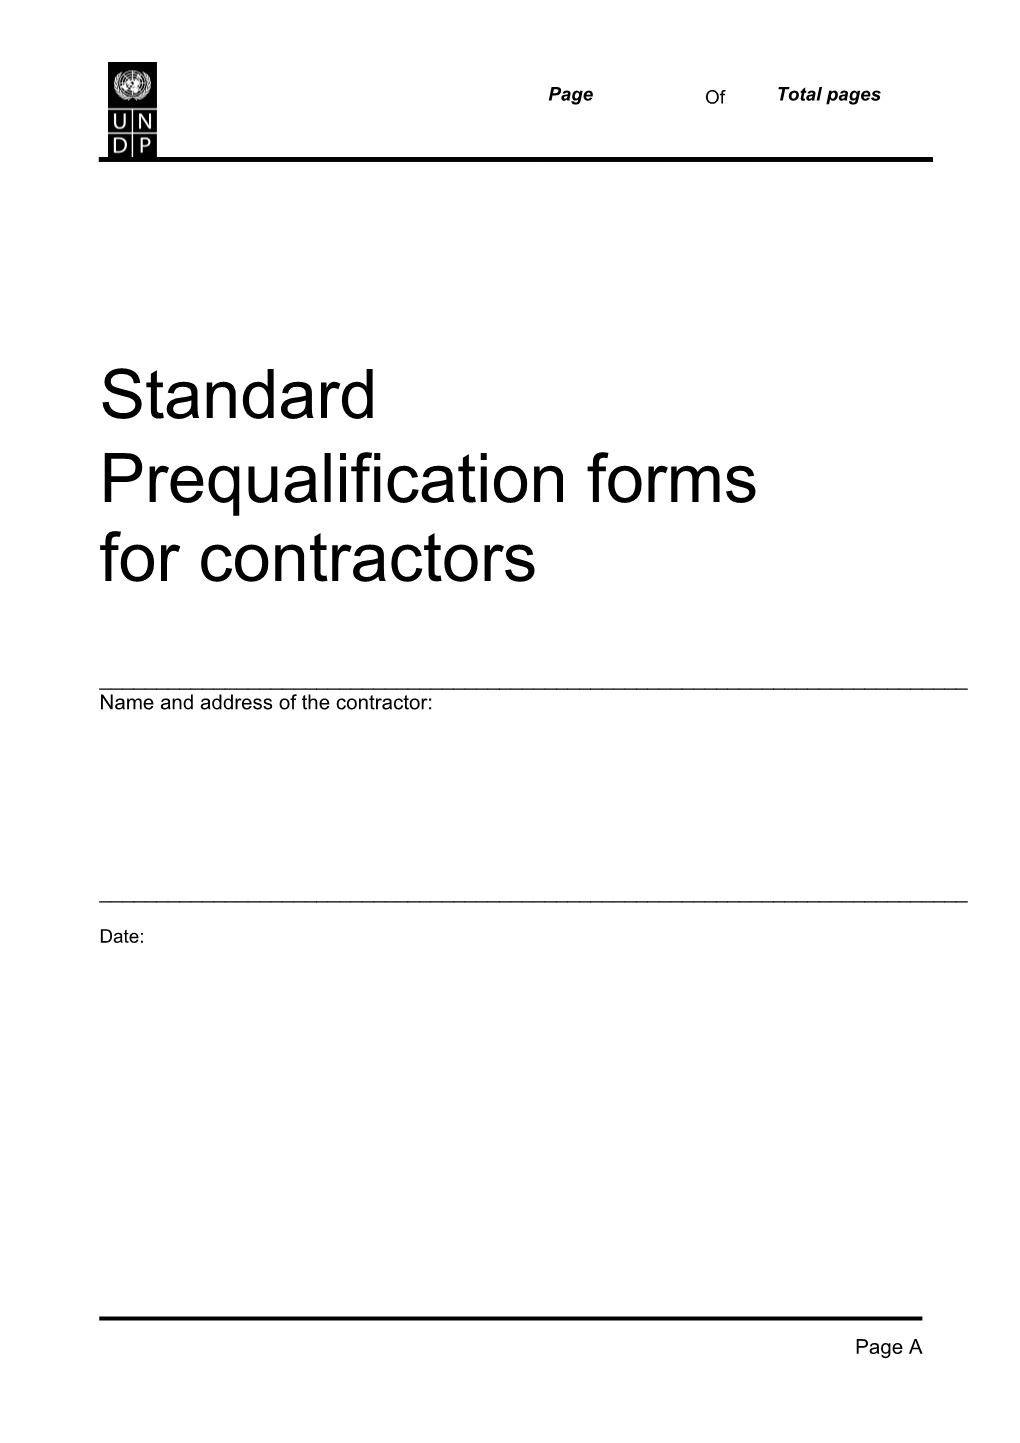 Standard Prequalification Forms for Contractors